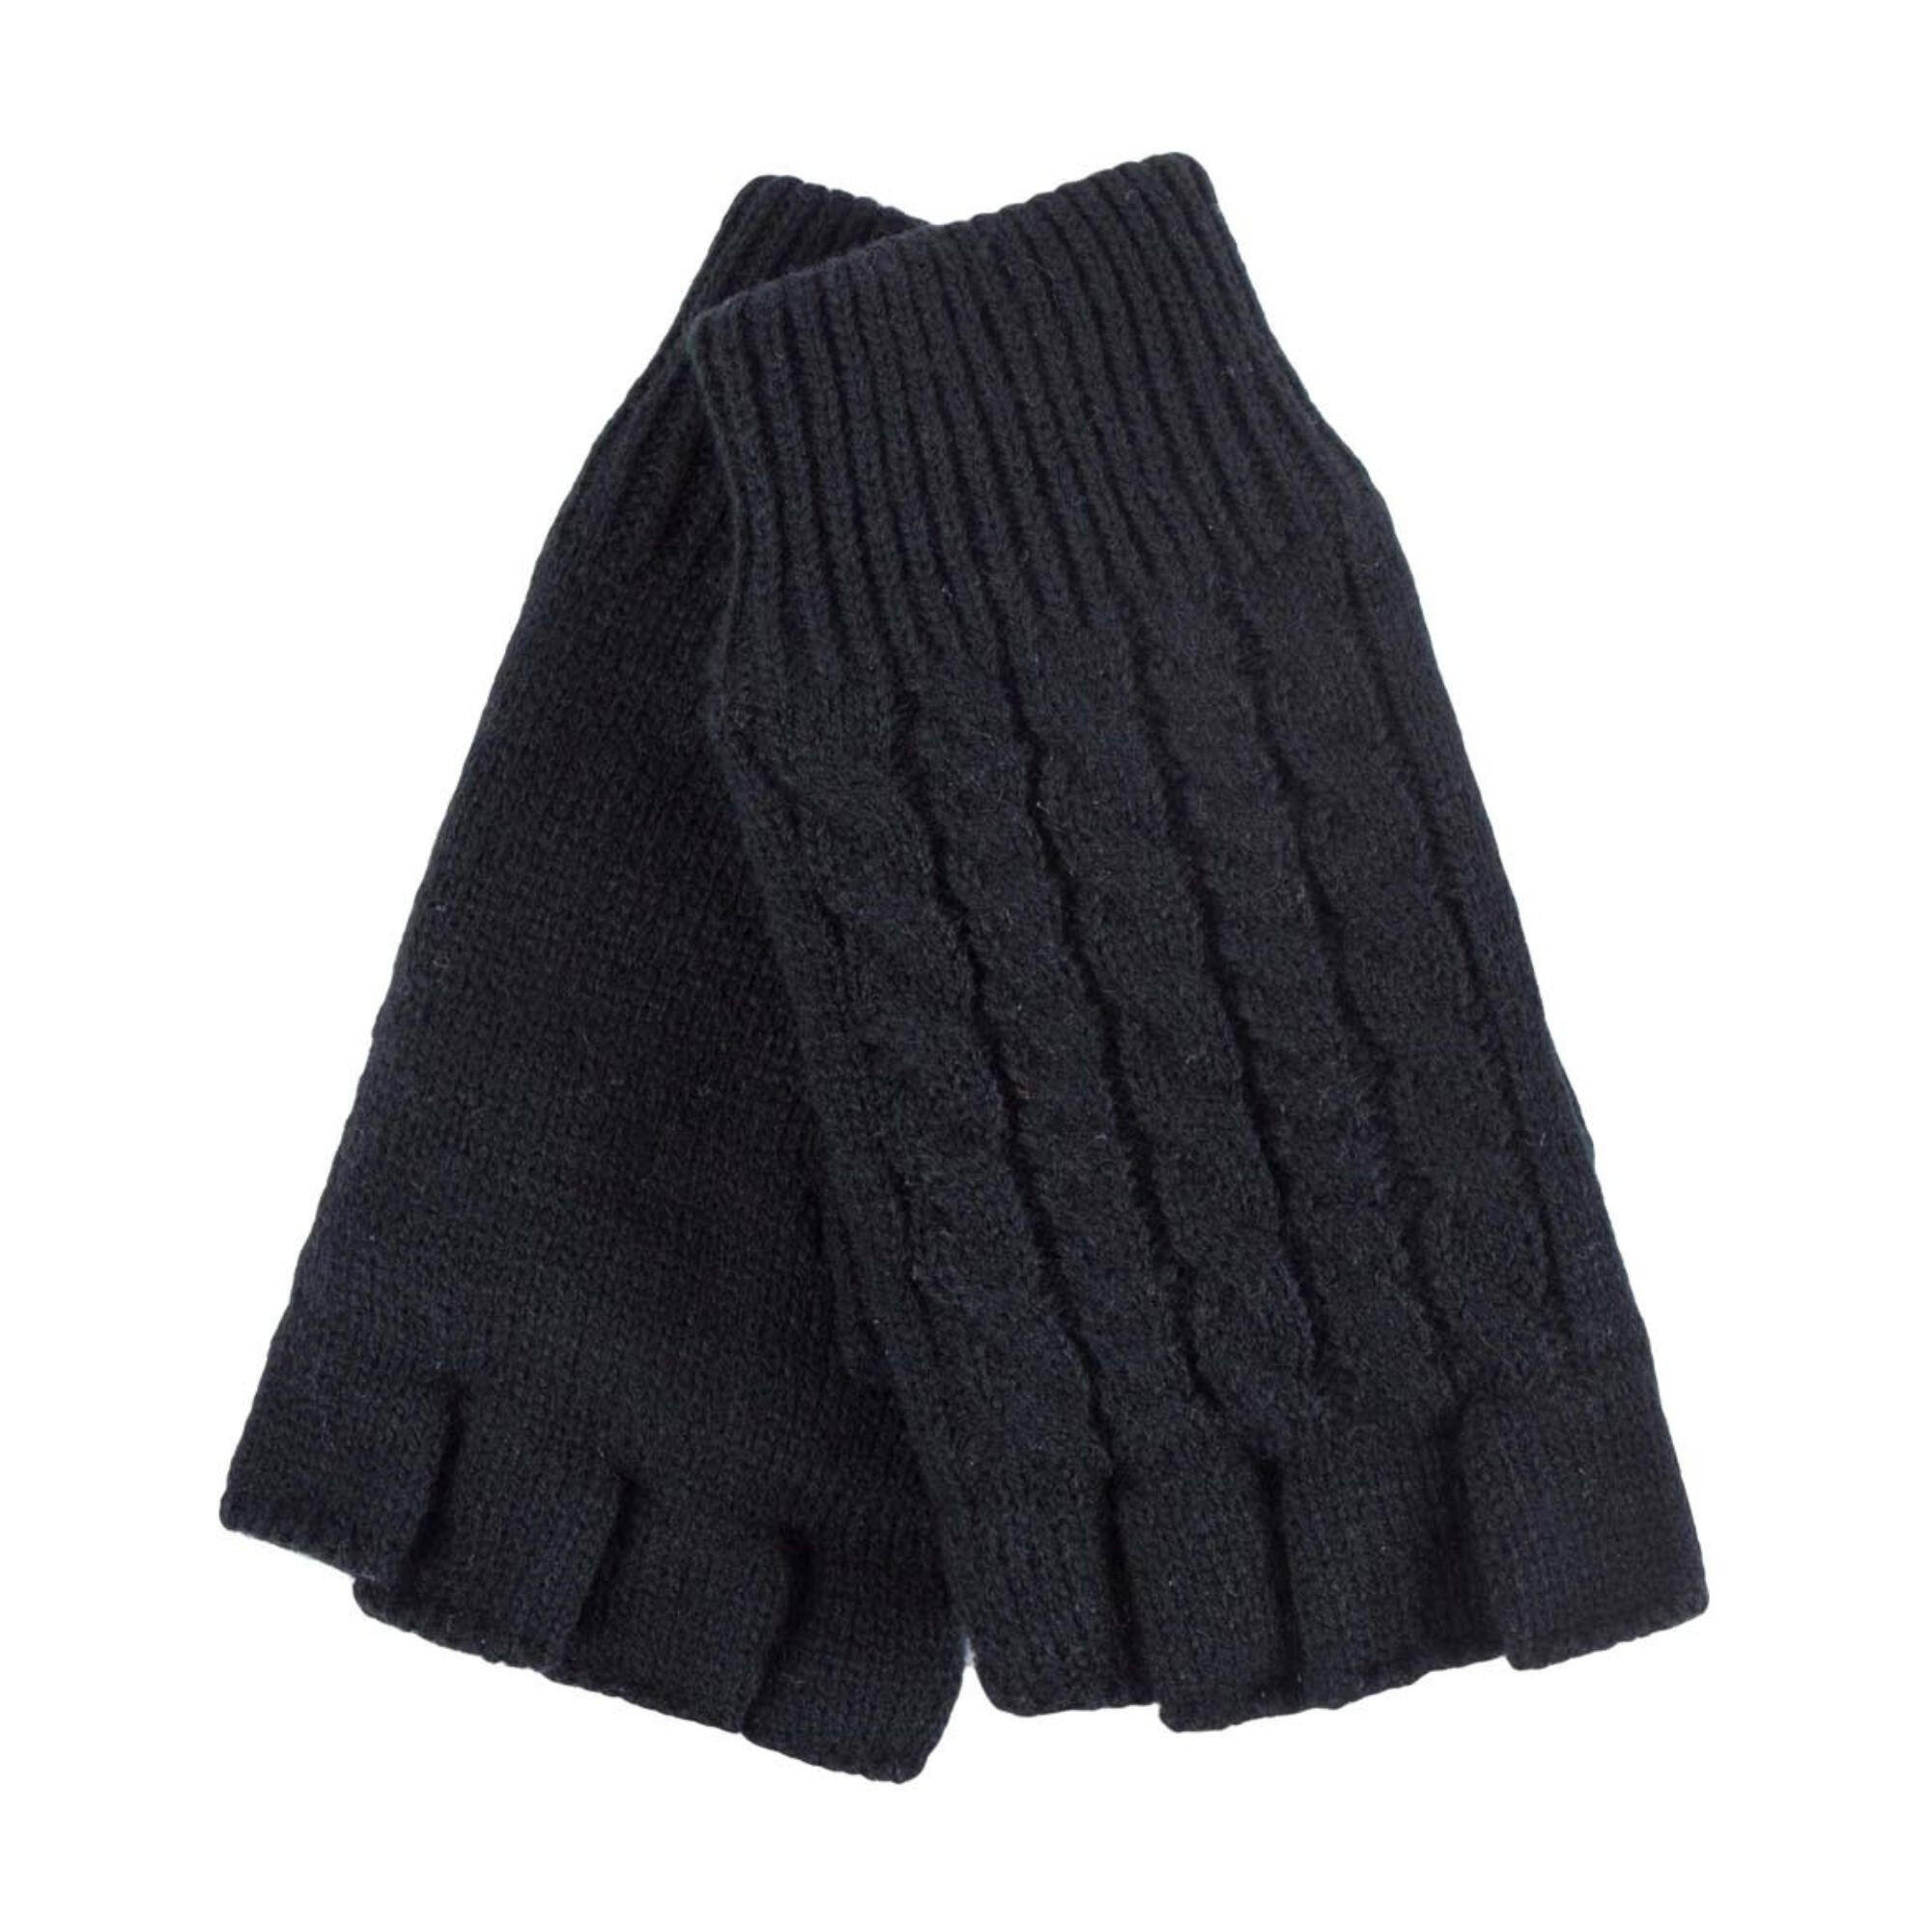 Ladies Cable Knitted Winter Thermal Fingerless Gloves 1/5